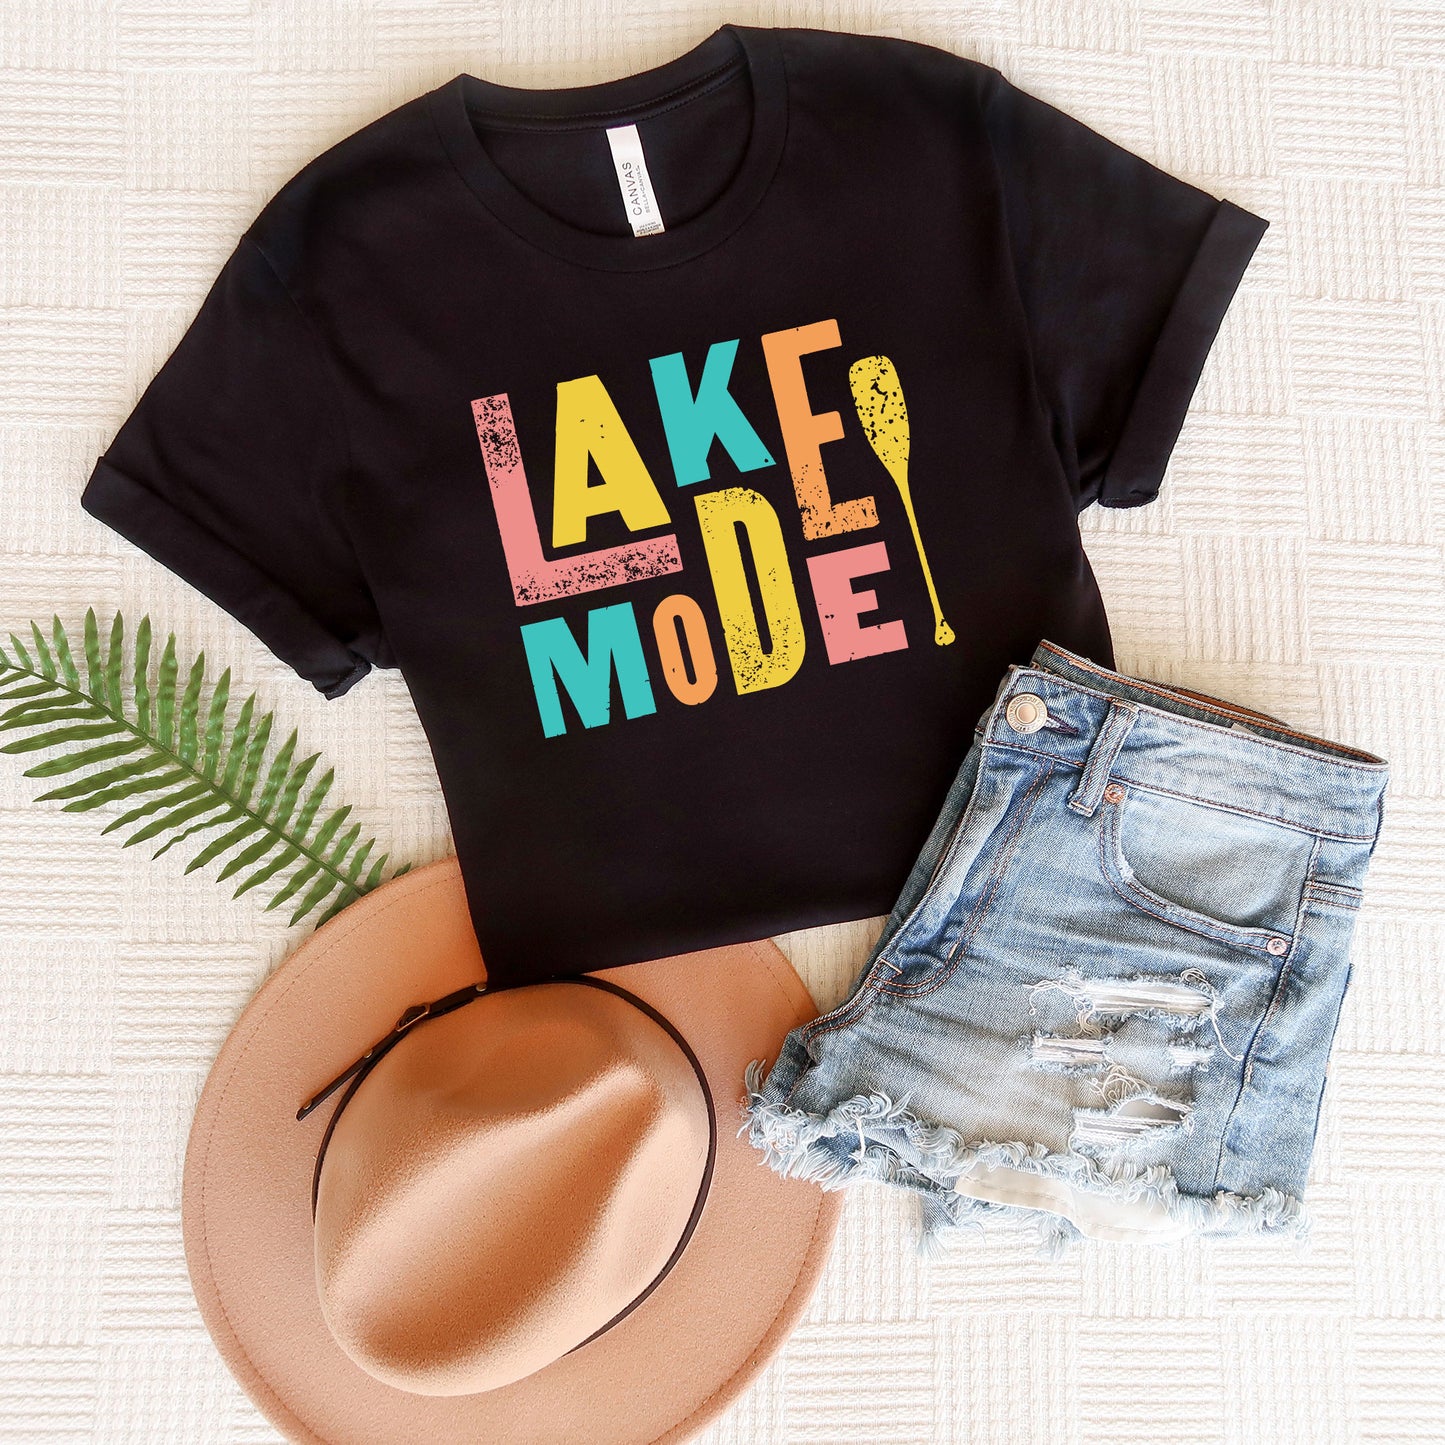 Lake Mode Colorful | Short Sleeve Graphic Tee